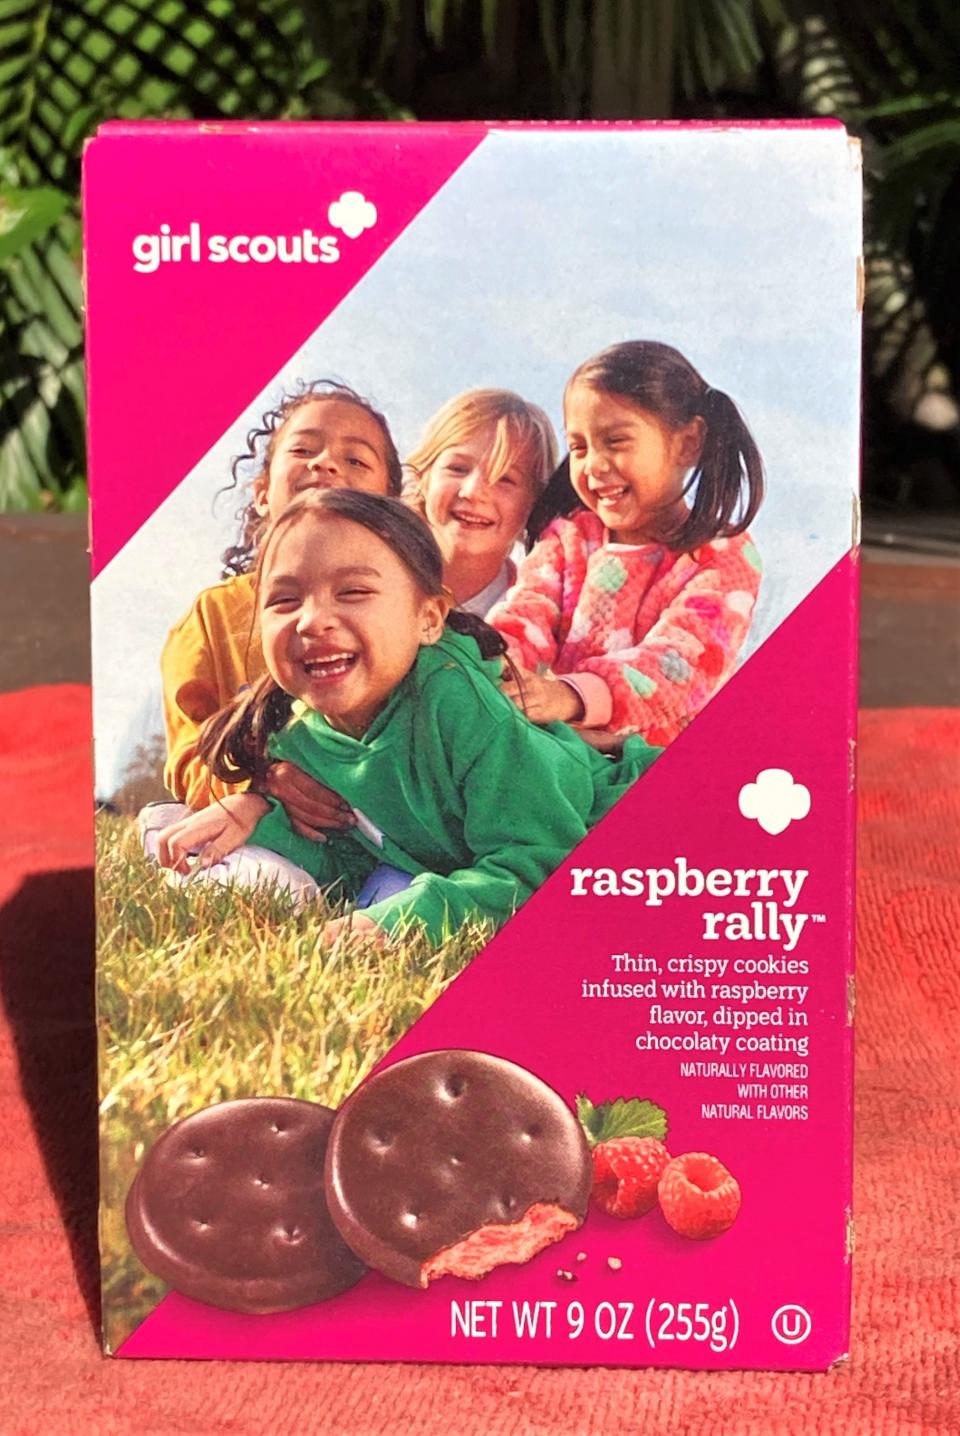 Raspberry Rally is the new kid on the block for Girl Scout Cookies in 2023. Though sometimes rookies take a season or two to find their way in the big leagues, this one comes in like Miami Dolphin greats Dan Marino throwing lasers his first year or Zack Thomas tackling everything in sight.